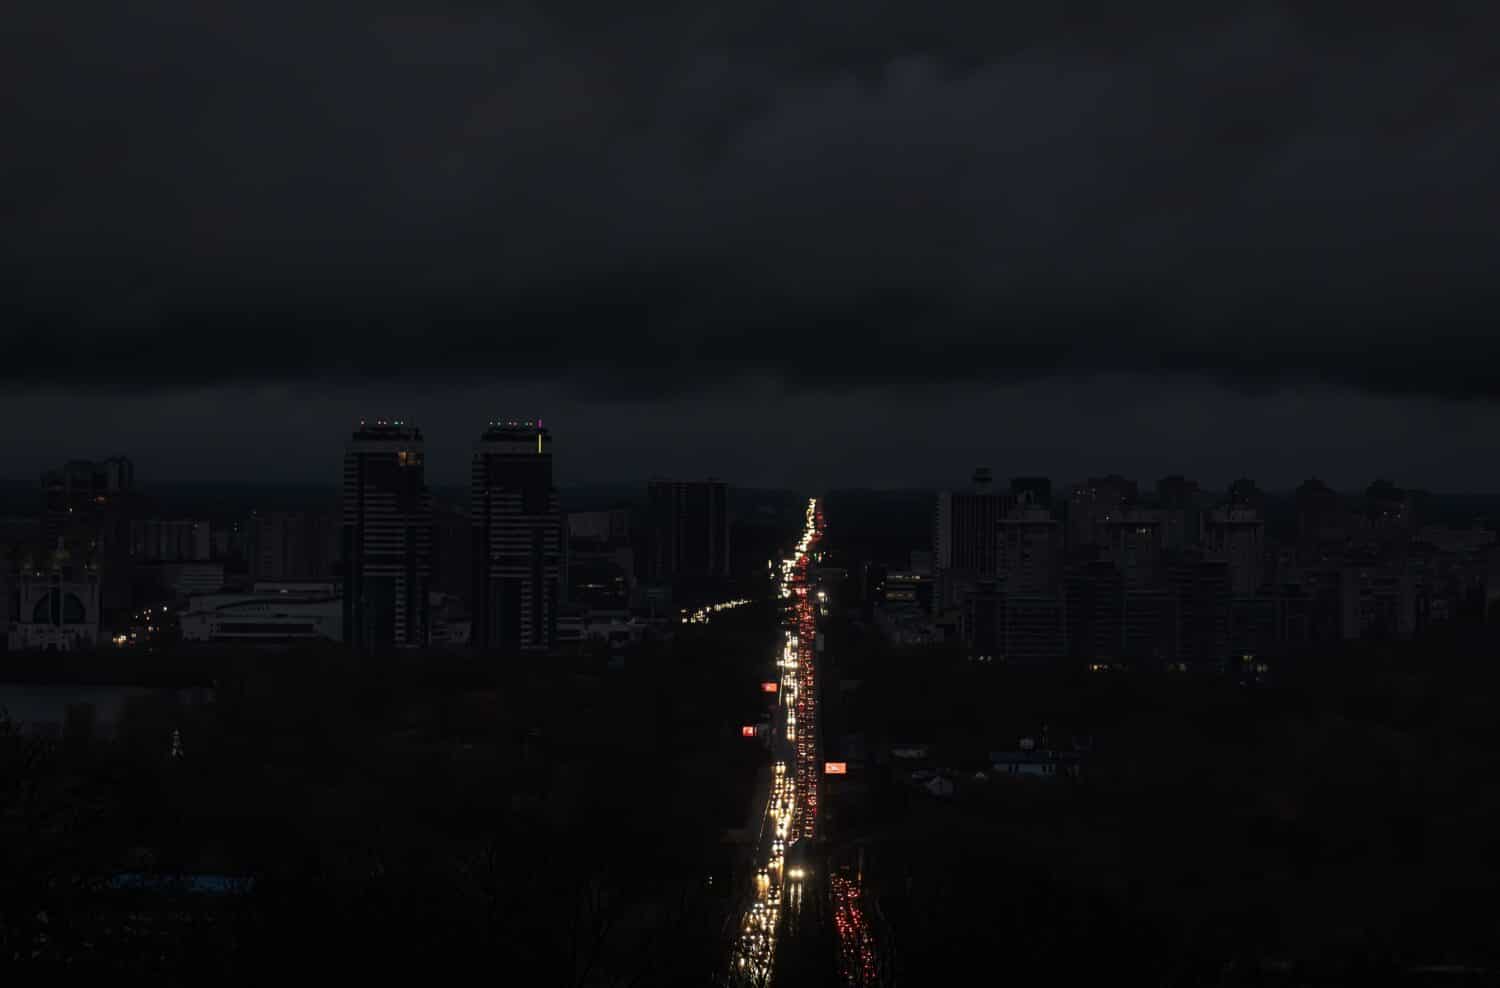 Blackout in the Ukrainian capital Kyiv. Capital streets without street lighting. Only the lights of passing cars are visible.